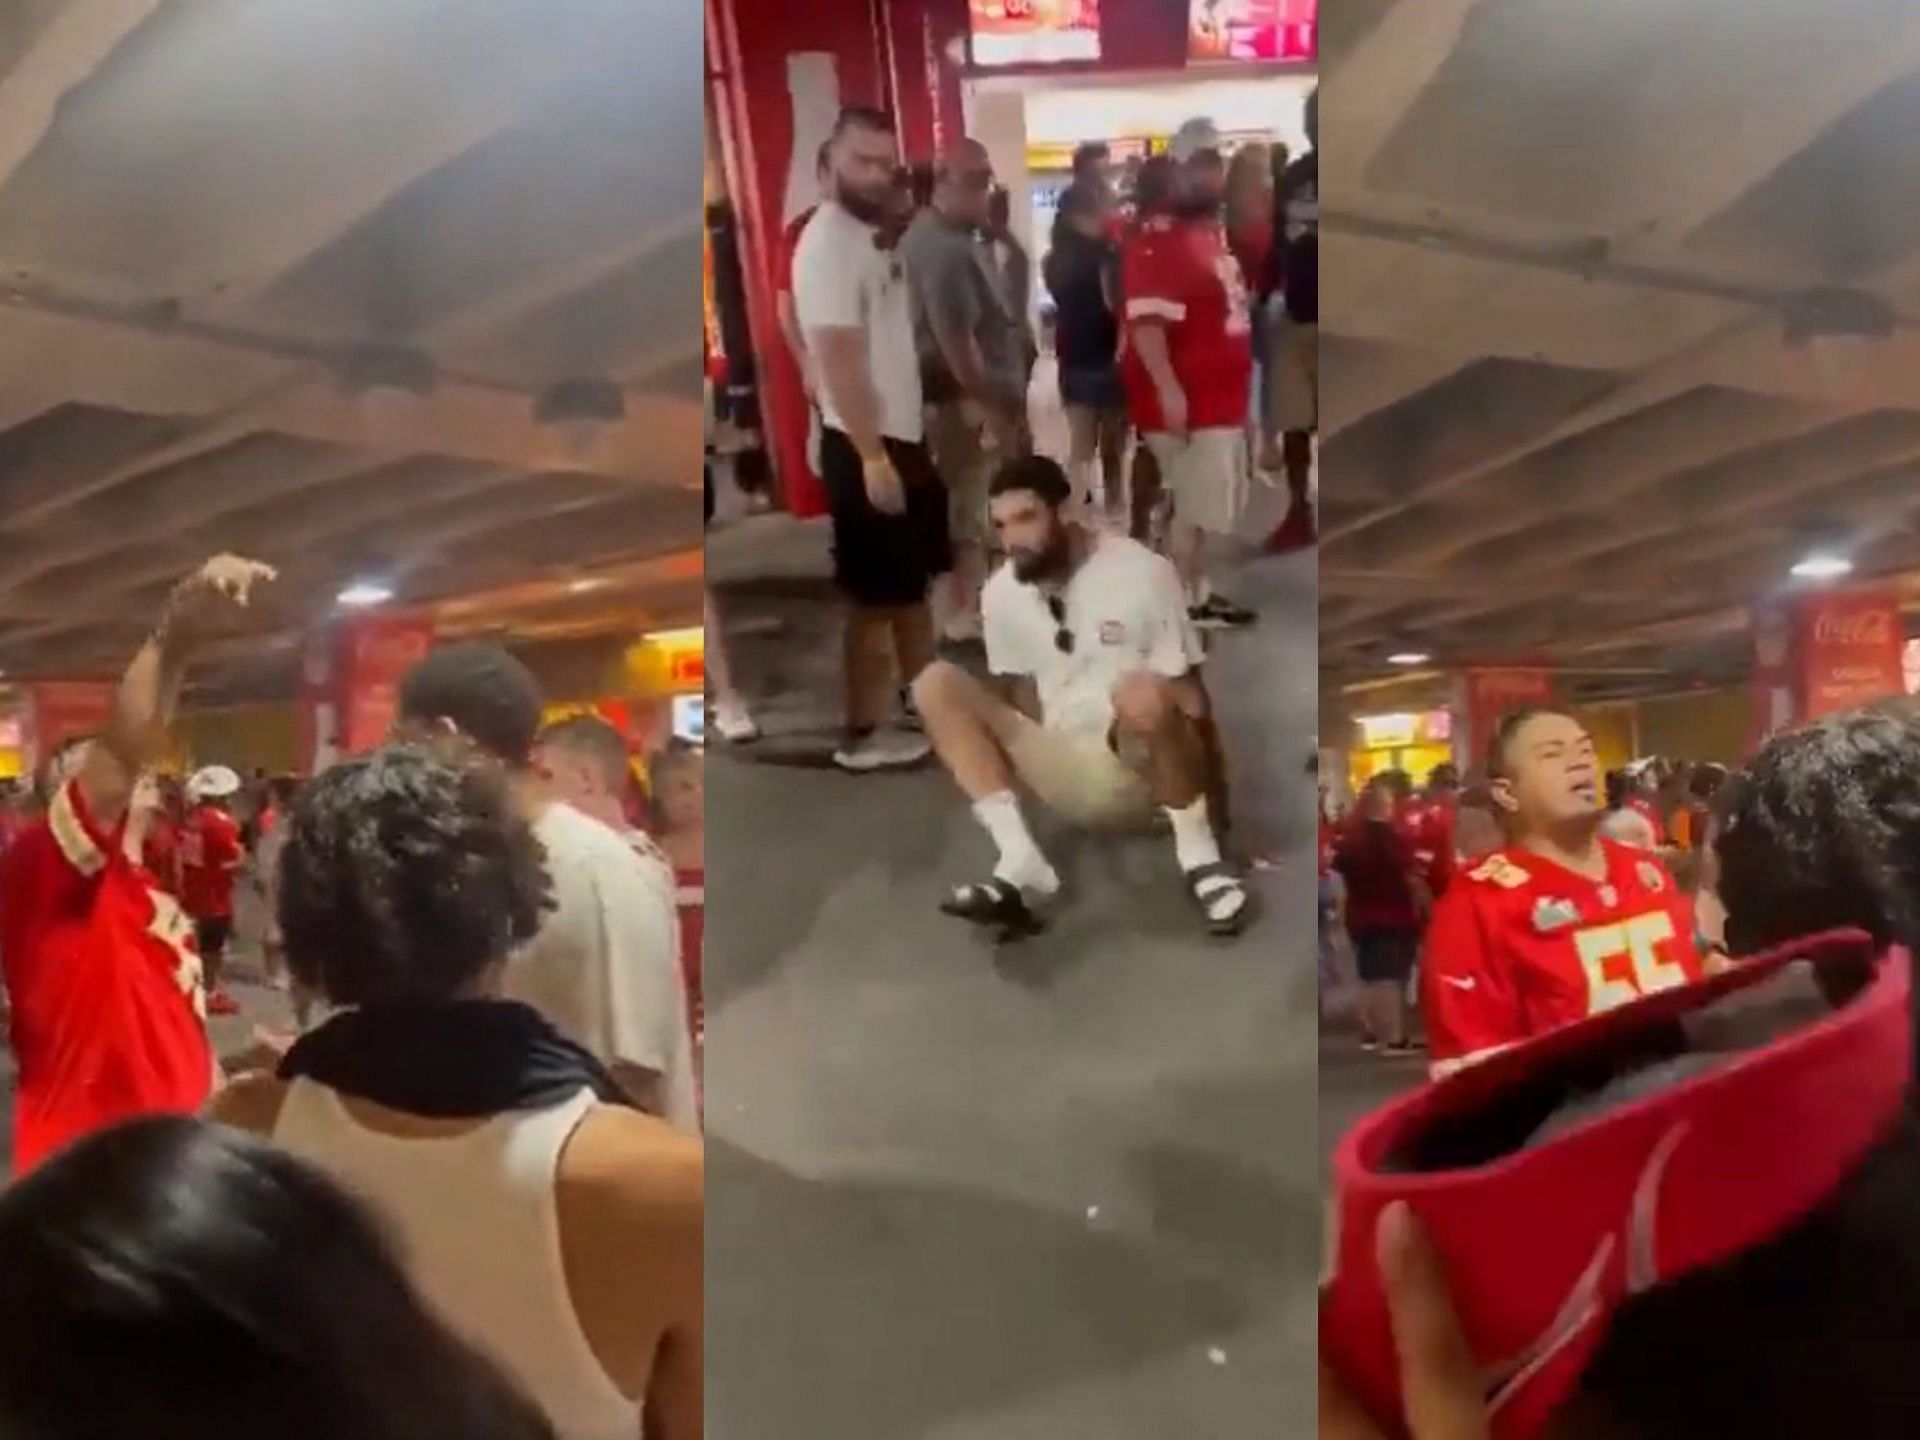 Chiefs fans fight - Courtesy of Total Pro Sports and GrindFace TV on Twitter